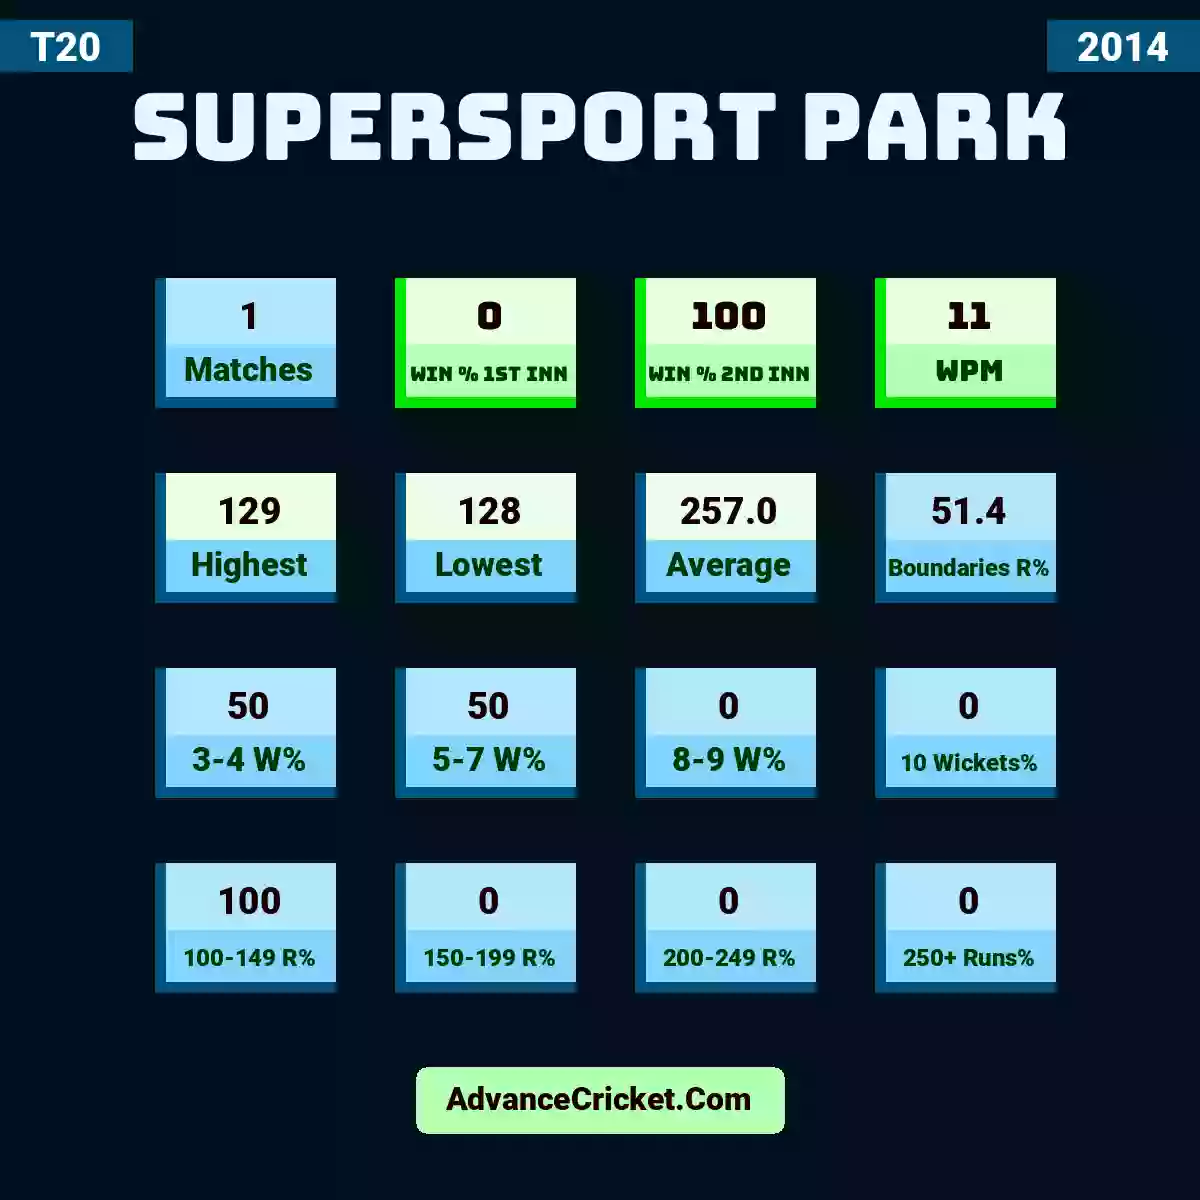 Image showing SuperSport Park with Matches: 1, Win % 1st Inn: 0, Win % 2nd Inn: 100, WPM: 11, Highest: 129, Lowest: 128, Average: 257.0, Boundaries R%: 51.4, 3-4 W%: 50, 5-7 W%: 50, 8-9 W%: 0, 10 Wickets%: 0, 100-149 R%: 100, 150-199 R%: 0, 200-249 R%: 0, 250+ Runs%: 0.